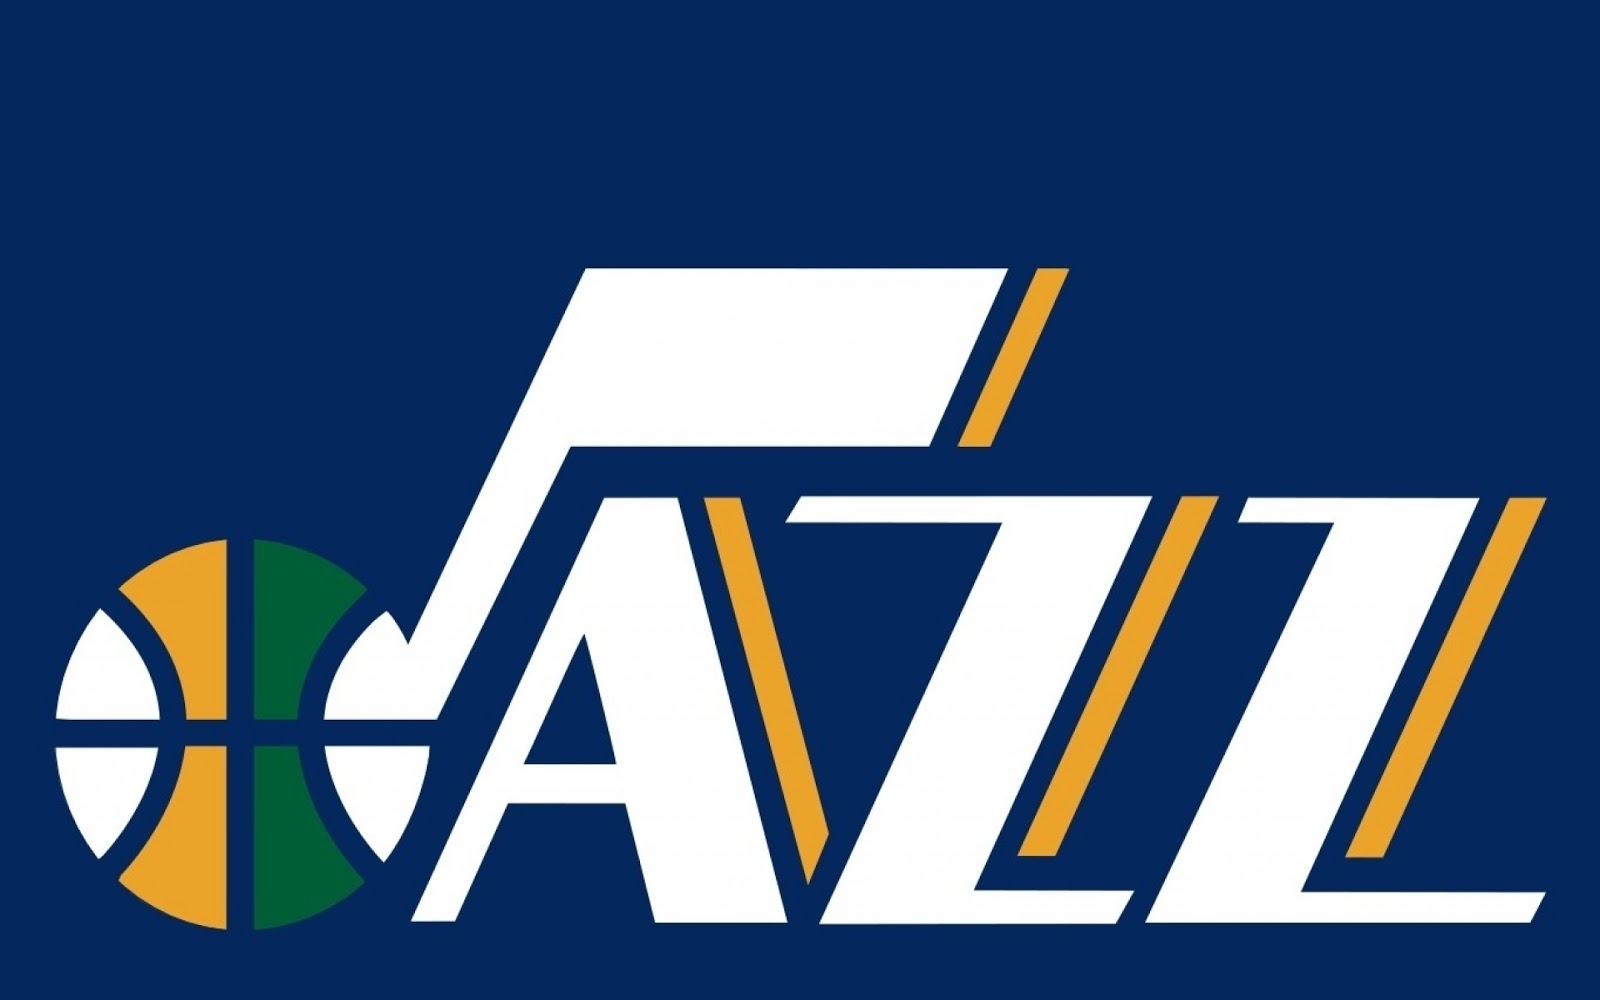 Jazz Basketball Club Logos New HD Wallpapers 2013 - Its All About ...